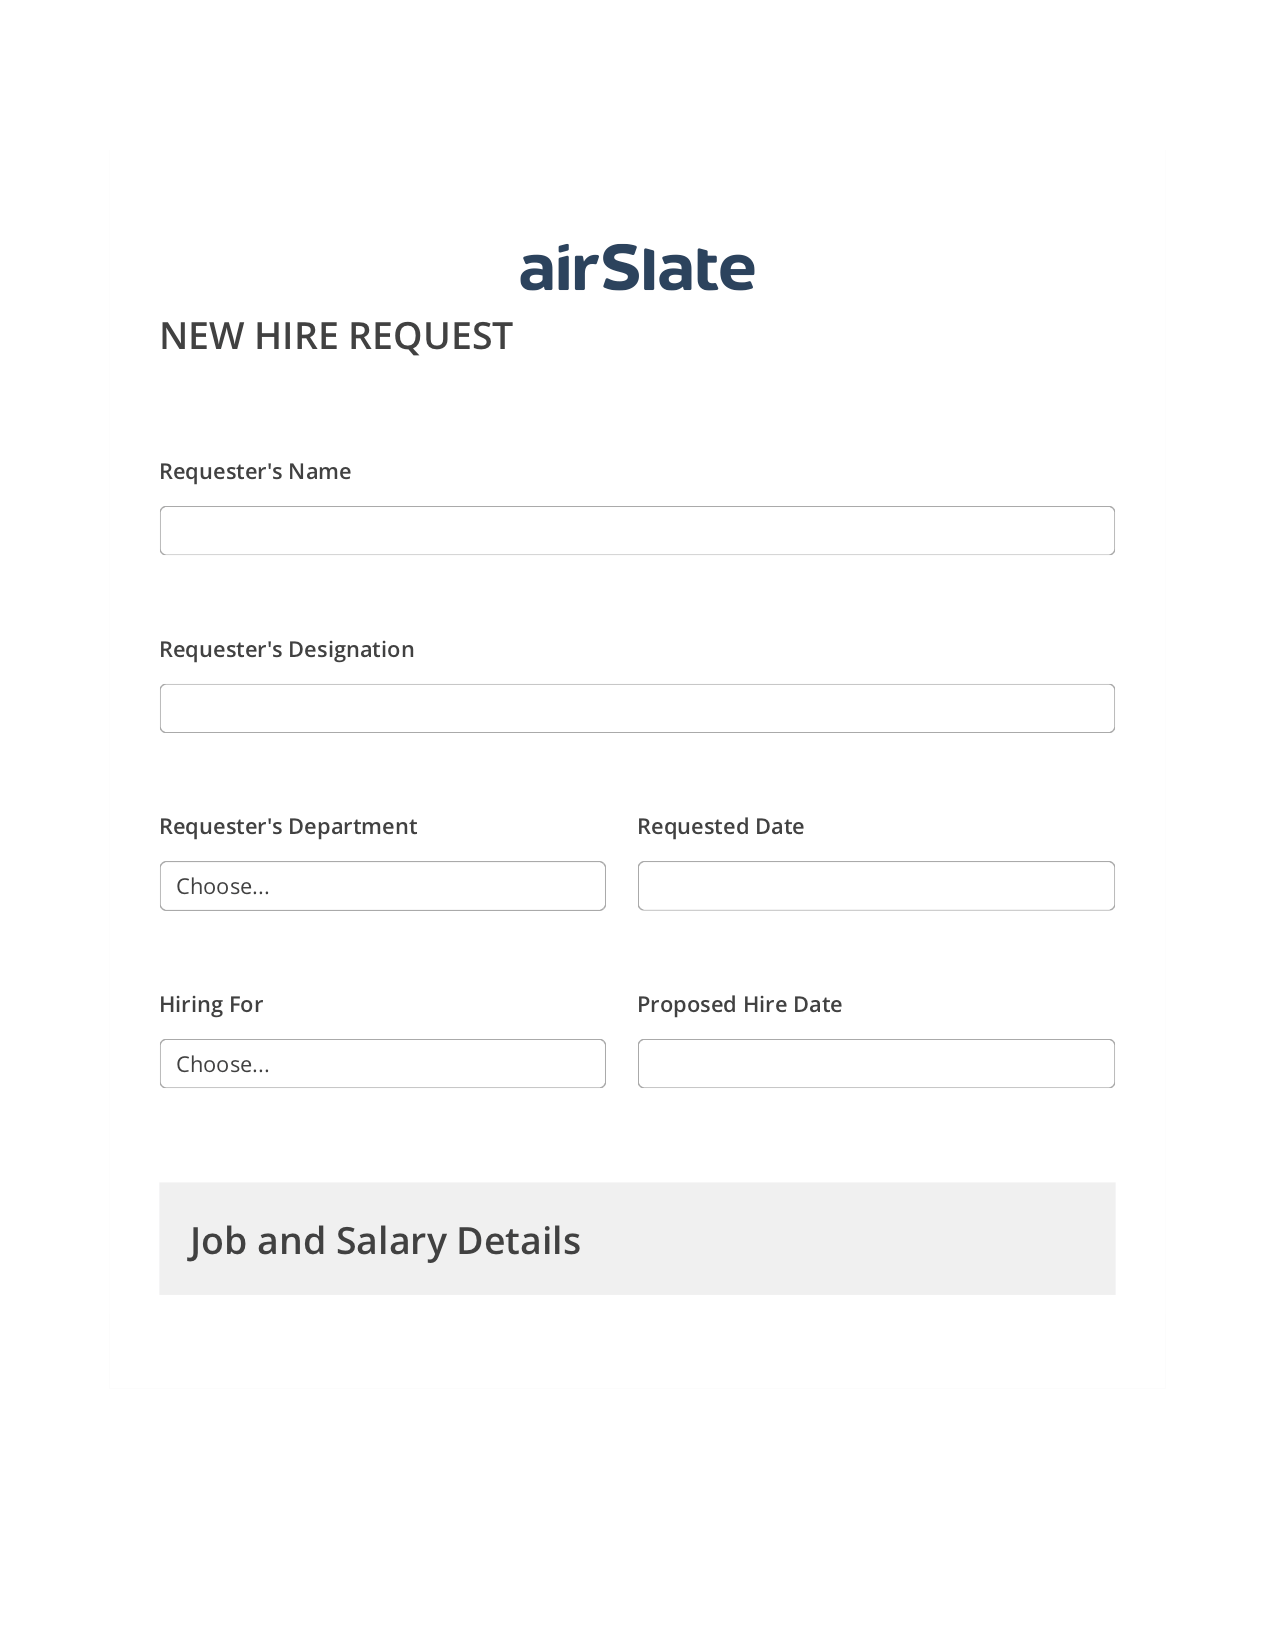 Hiring Request Workflow Pre-fill from Litmos bot, Update NetSuite Record Bot, Archive to Google Drive Bot